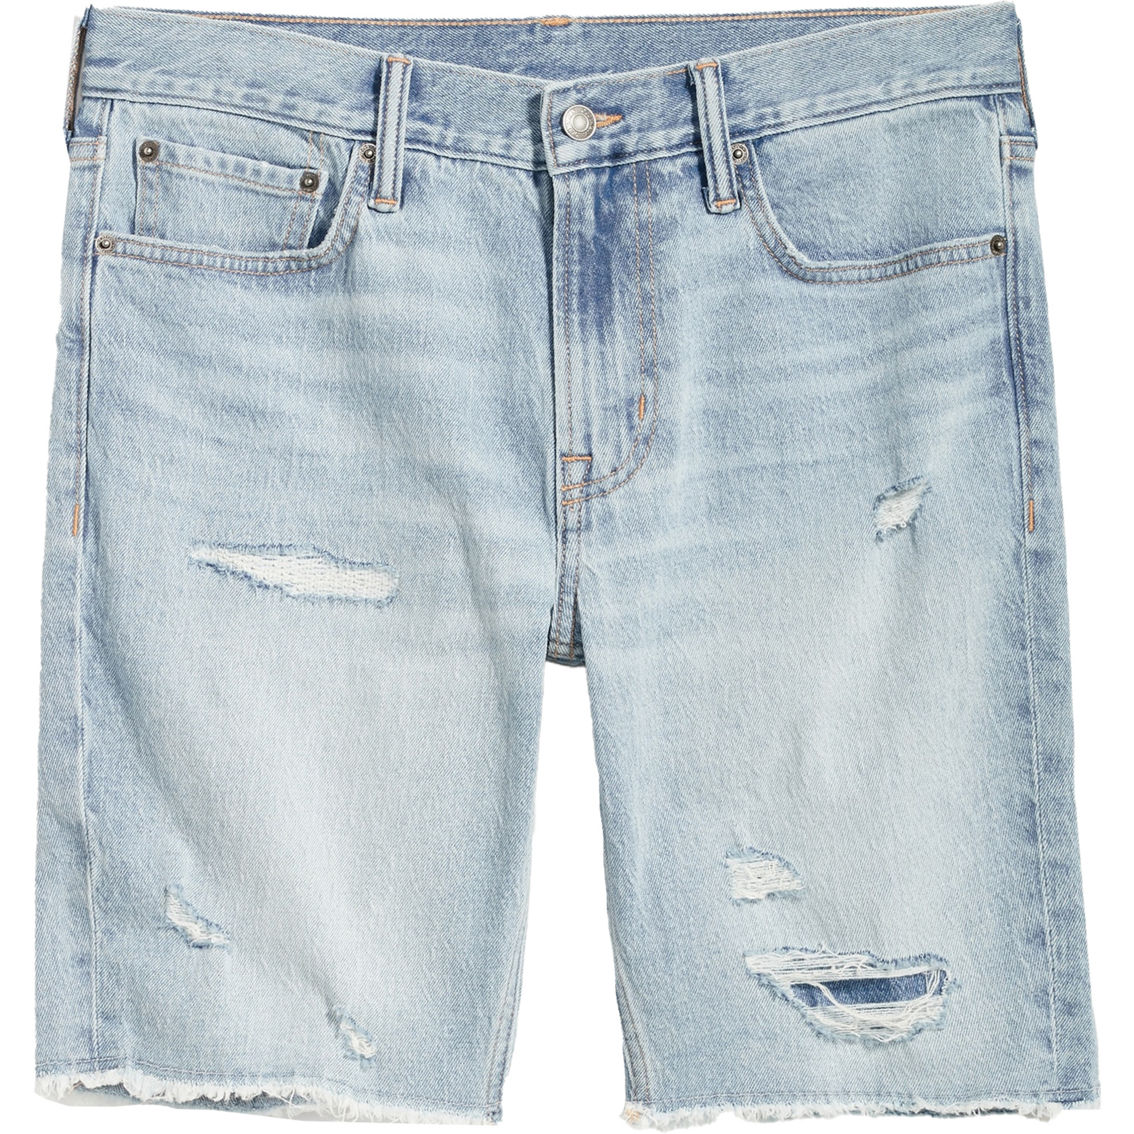 Old Navy Slim Ripped Cut Off 9 In. Jean Shorts | Shorts | Clothing ...